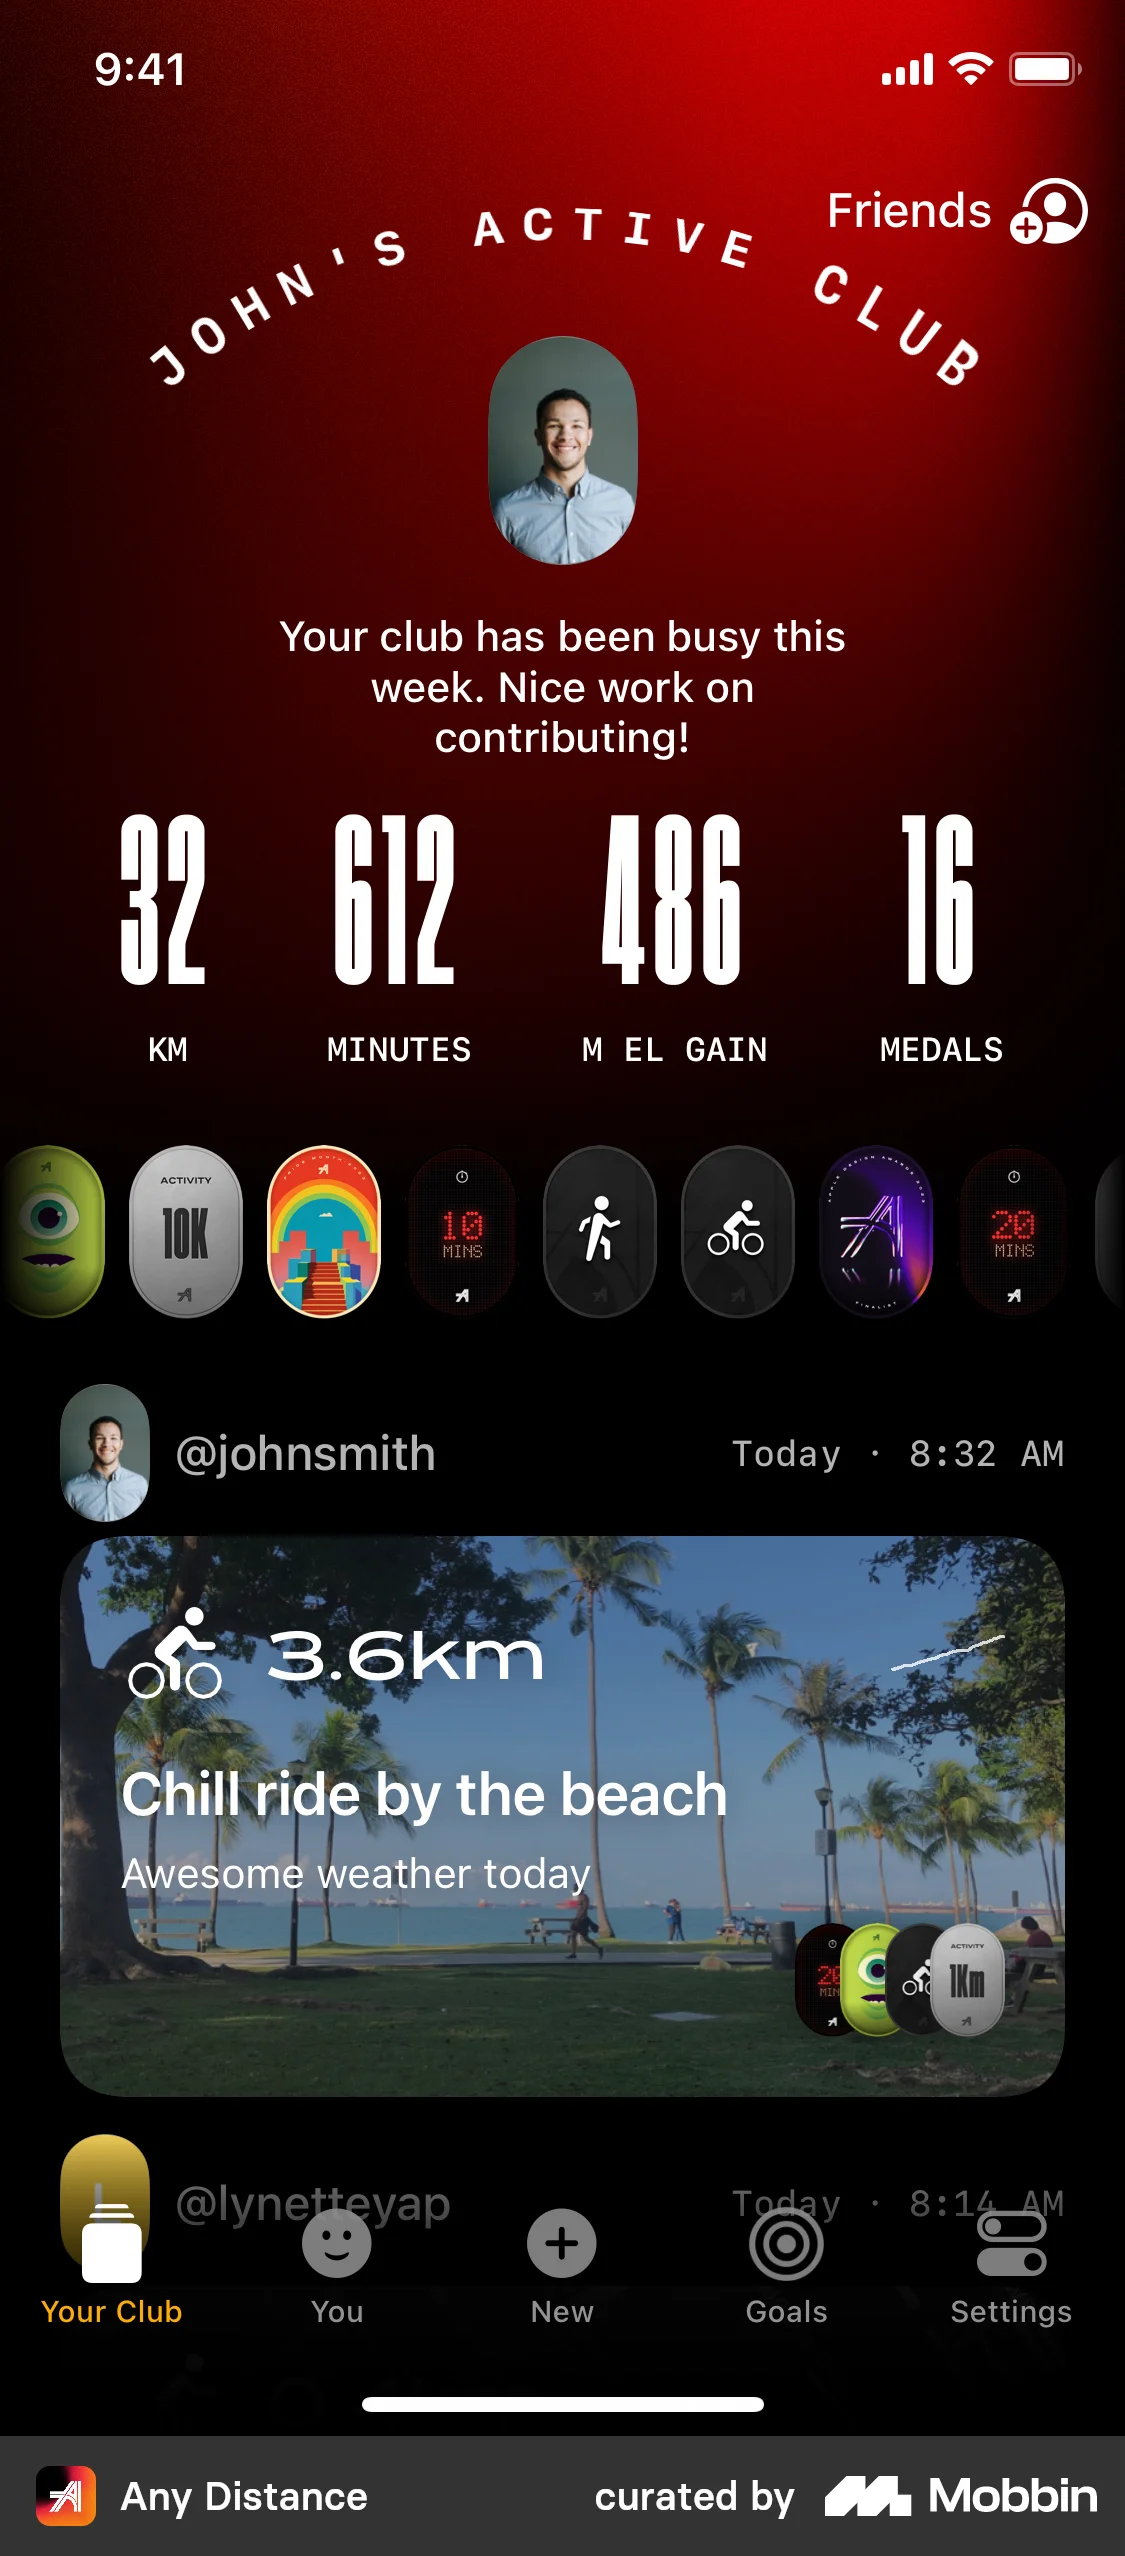 Any Distance Starting new activity screen